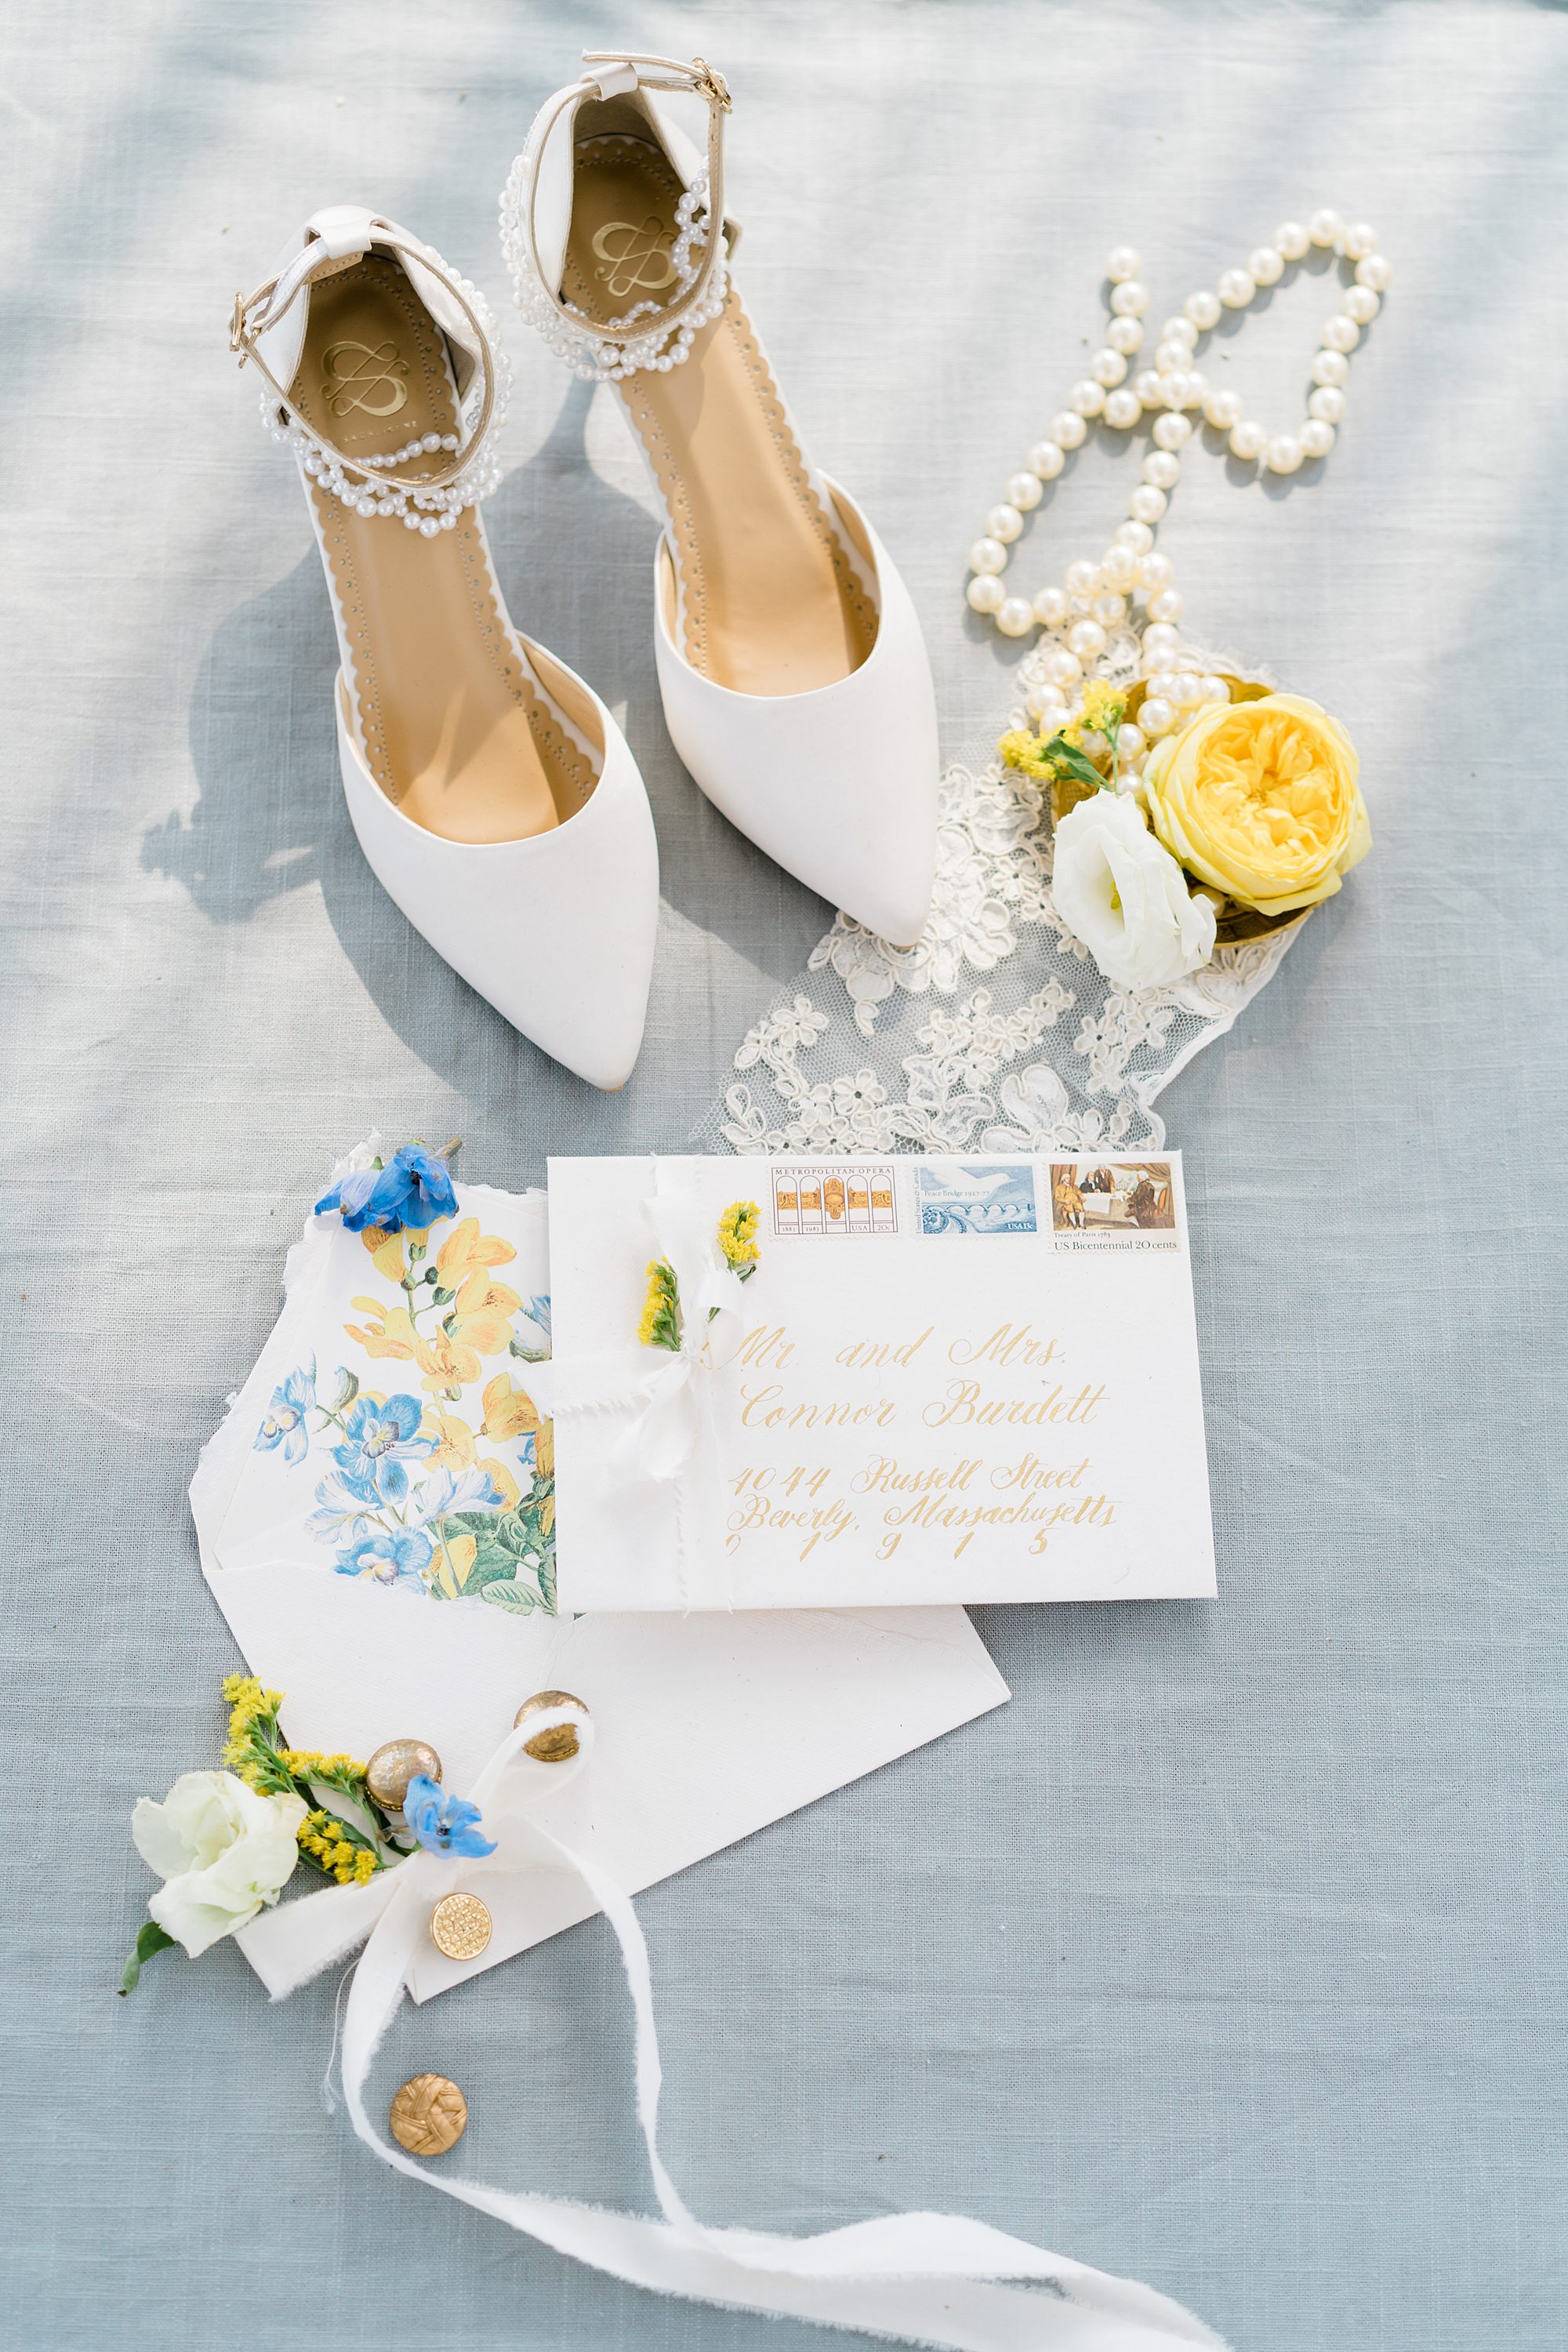 wedding invitations and details